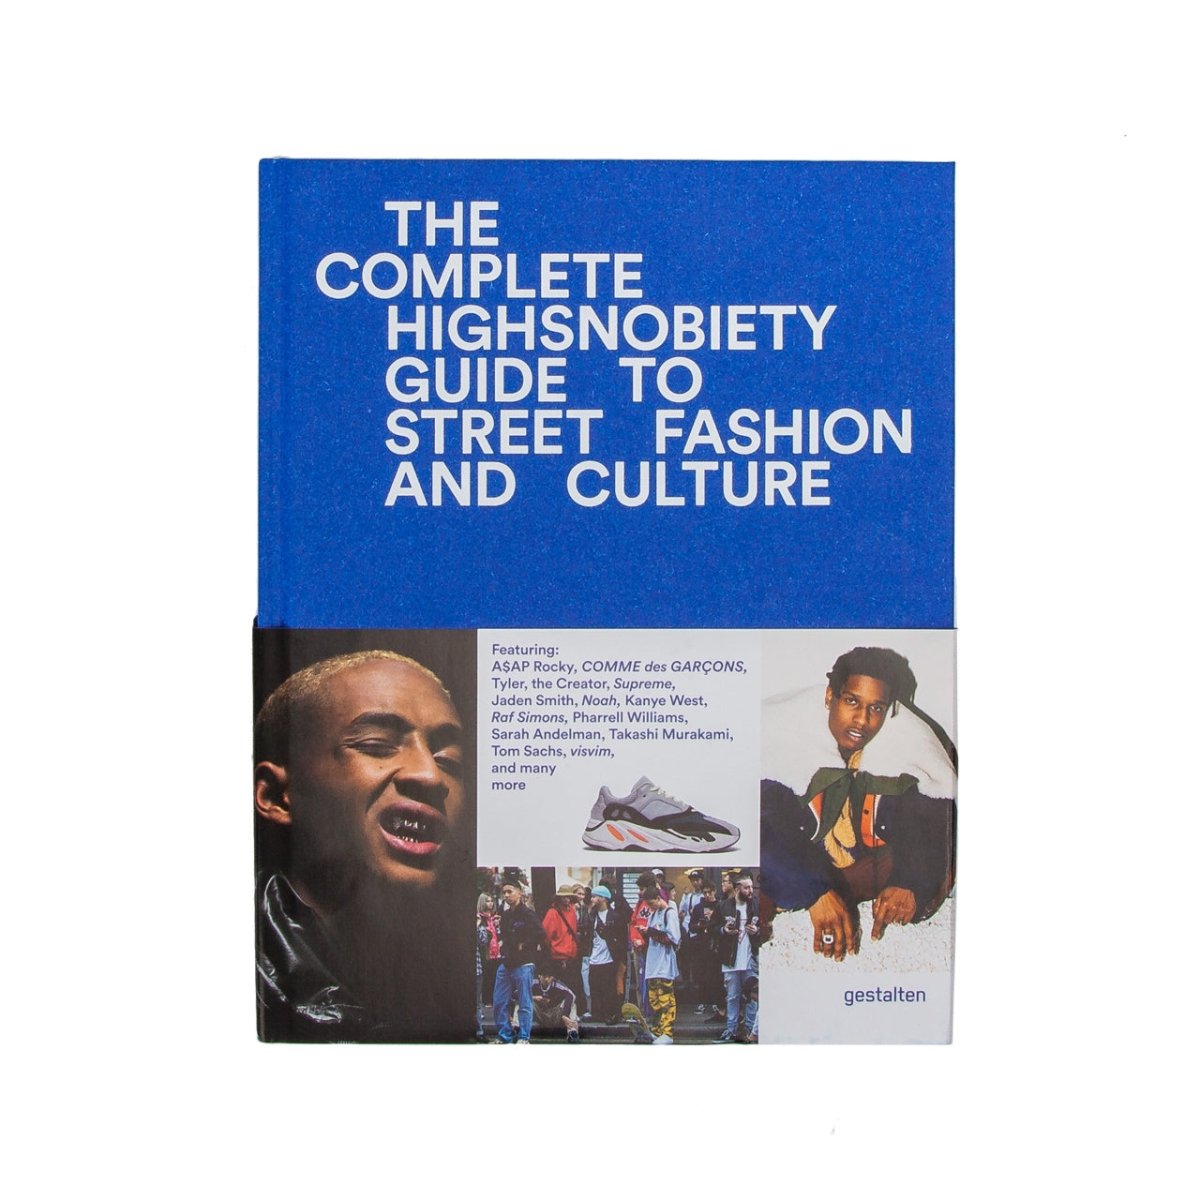 Gestalten: The Incomplete ''High Snobiety Guide To Street Fashion and Culture''  - Allike Store